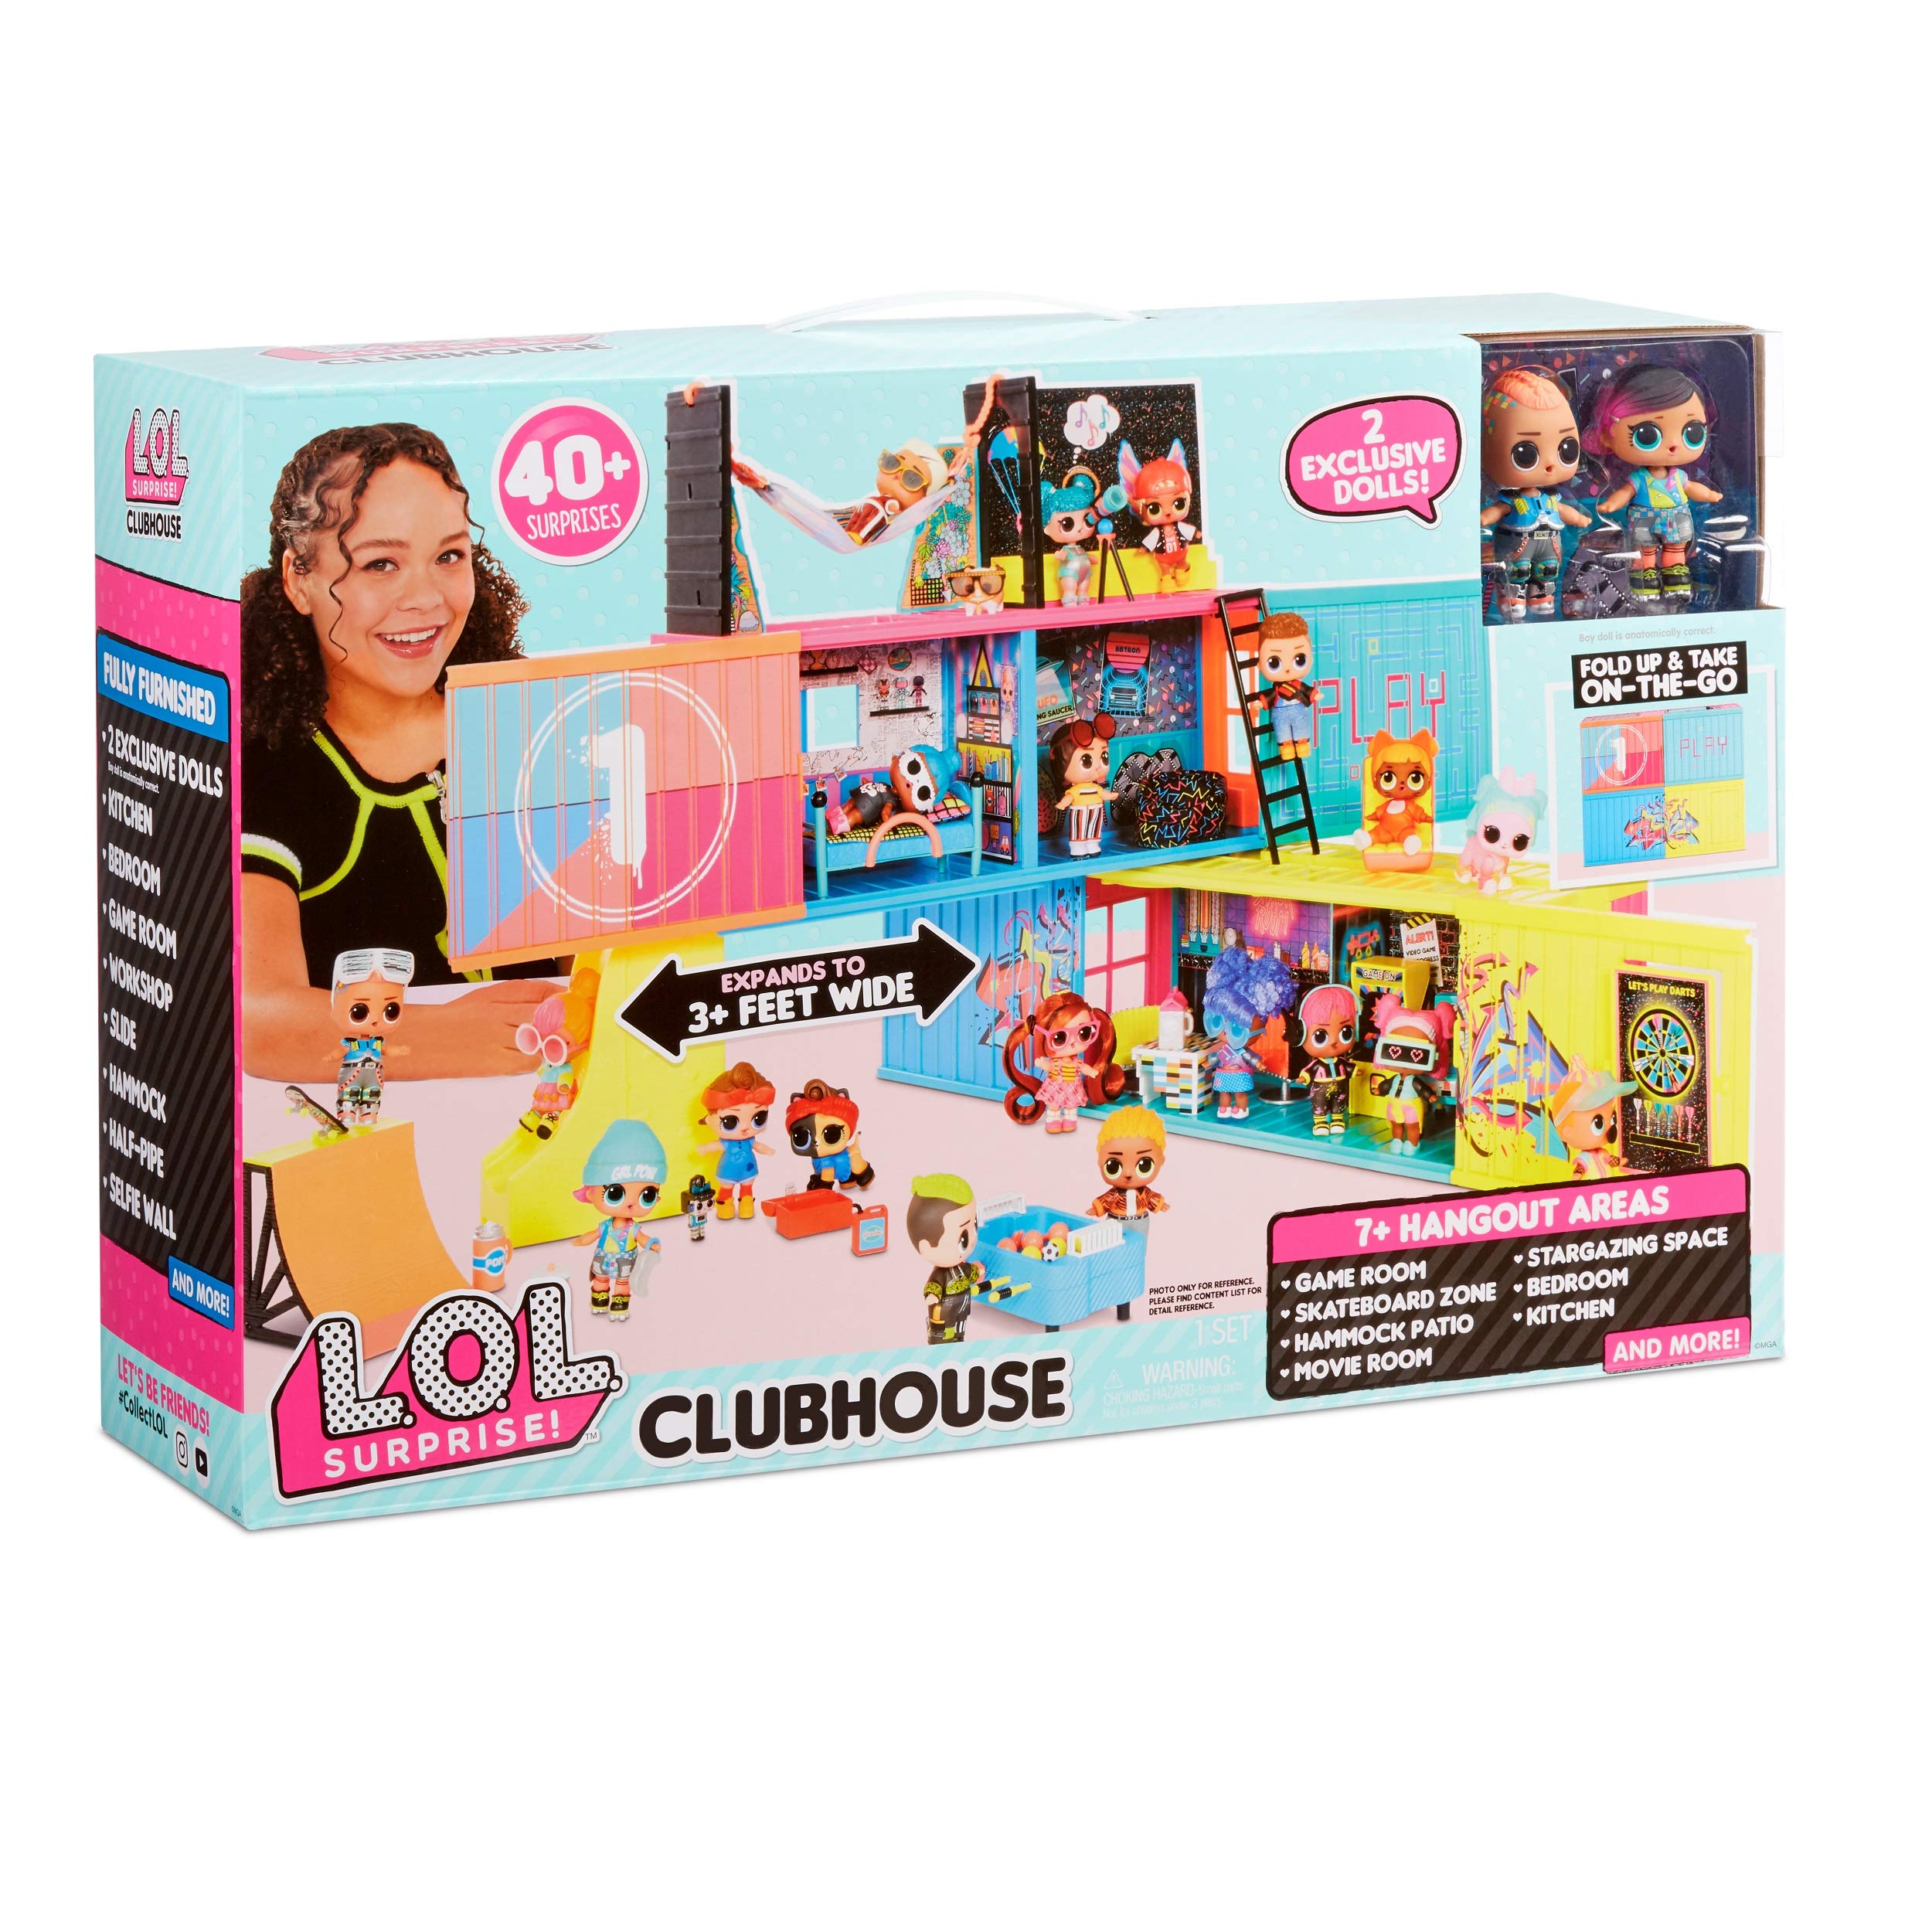 L.O.L. Surprise! Clubhouse Playset with 40+ Surprises and 2 Exclusives Dolls (569404E7C)